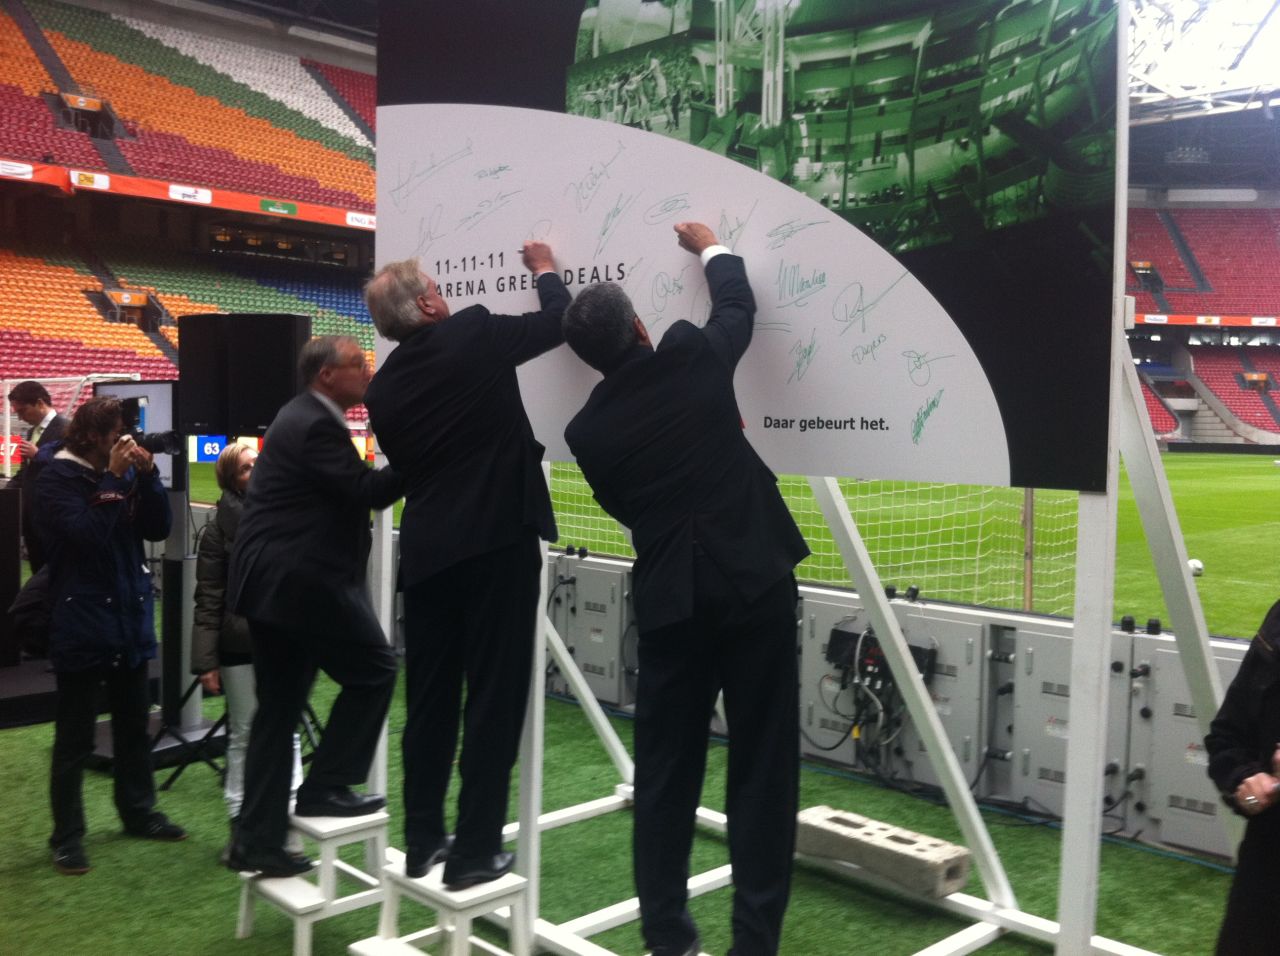 It has a deal to install its "sugar seats" at Amsterdam ArenA, home of Ajax football club. Dignitaries signed up at 11 a.m. on November 11, 2011 -- which was Sustainability Day in the Netherlands.